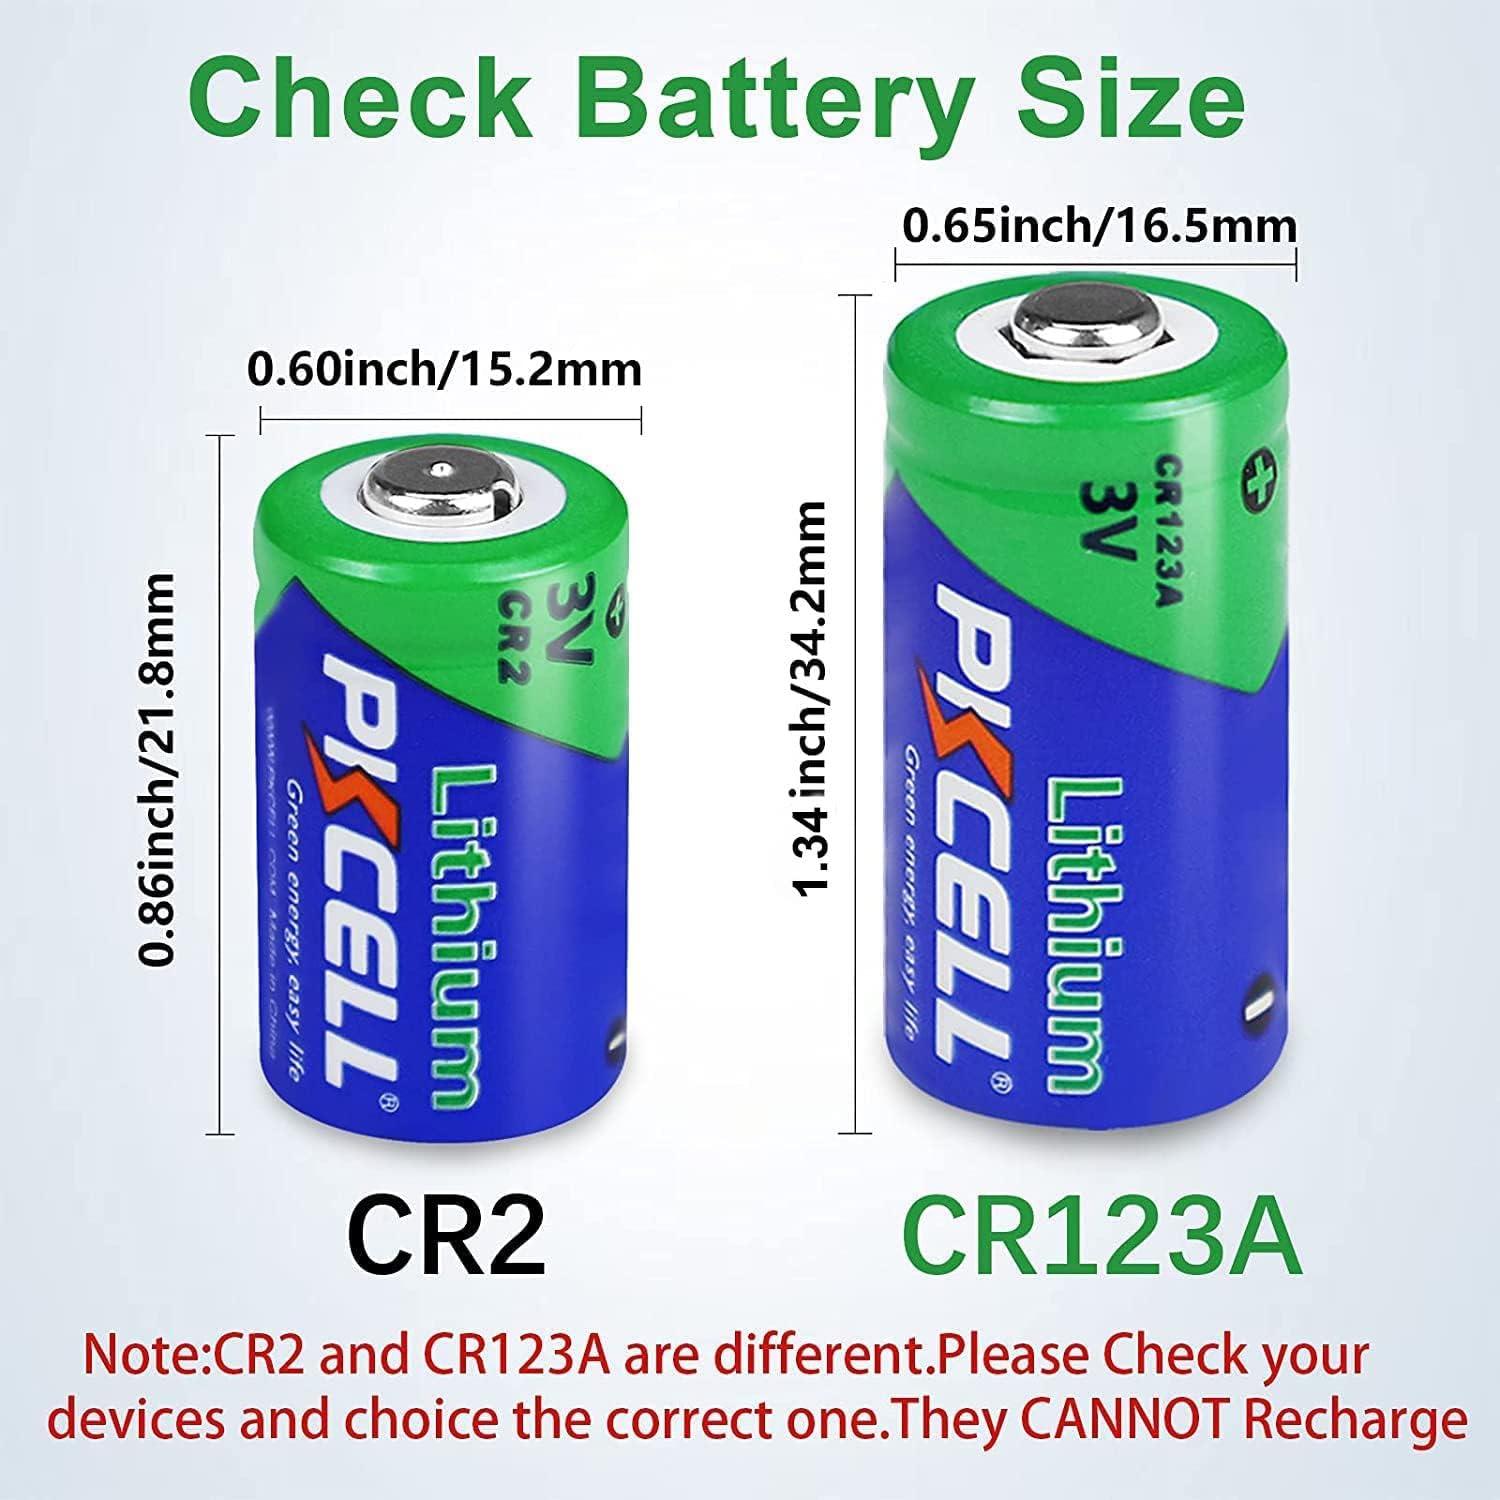 CR123A 3V Lithium Battery 1500mAh 2 Pack, 123 Batteries Lithium, 123A Lithium  Batteries 3 Volt High Power, CR123 for High Intensity Flashlight, Home  Safety, Security Devices 1 Count (Pack of 2)